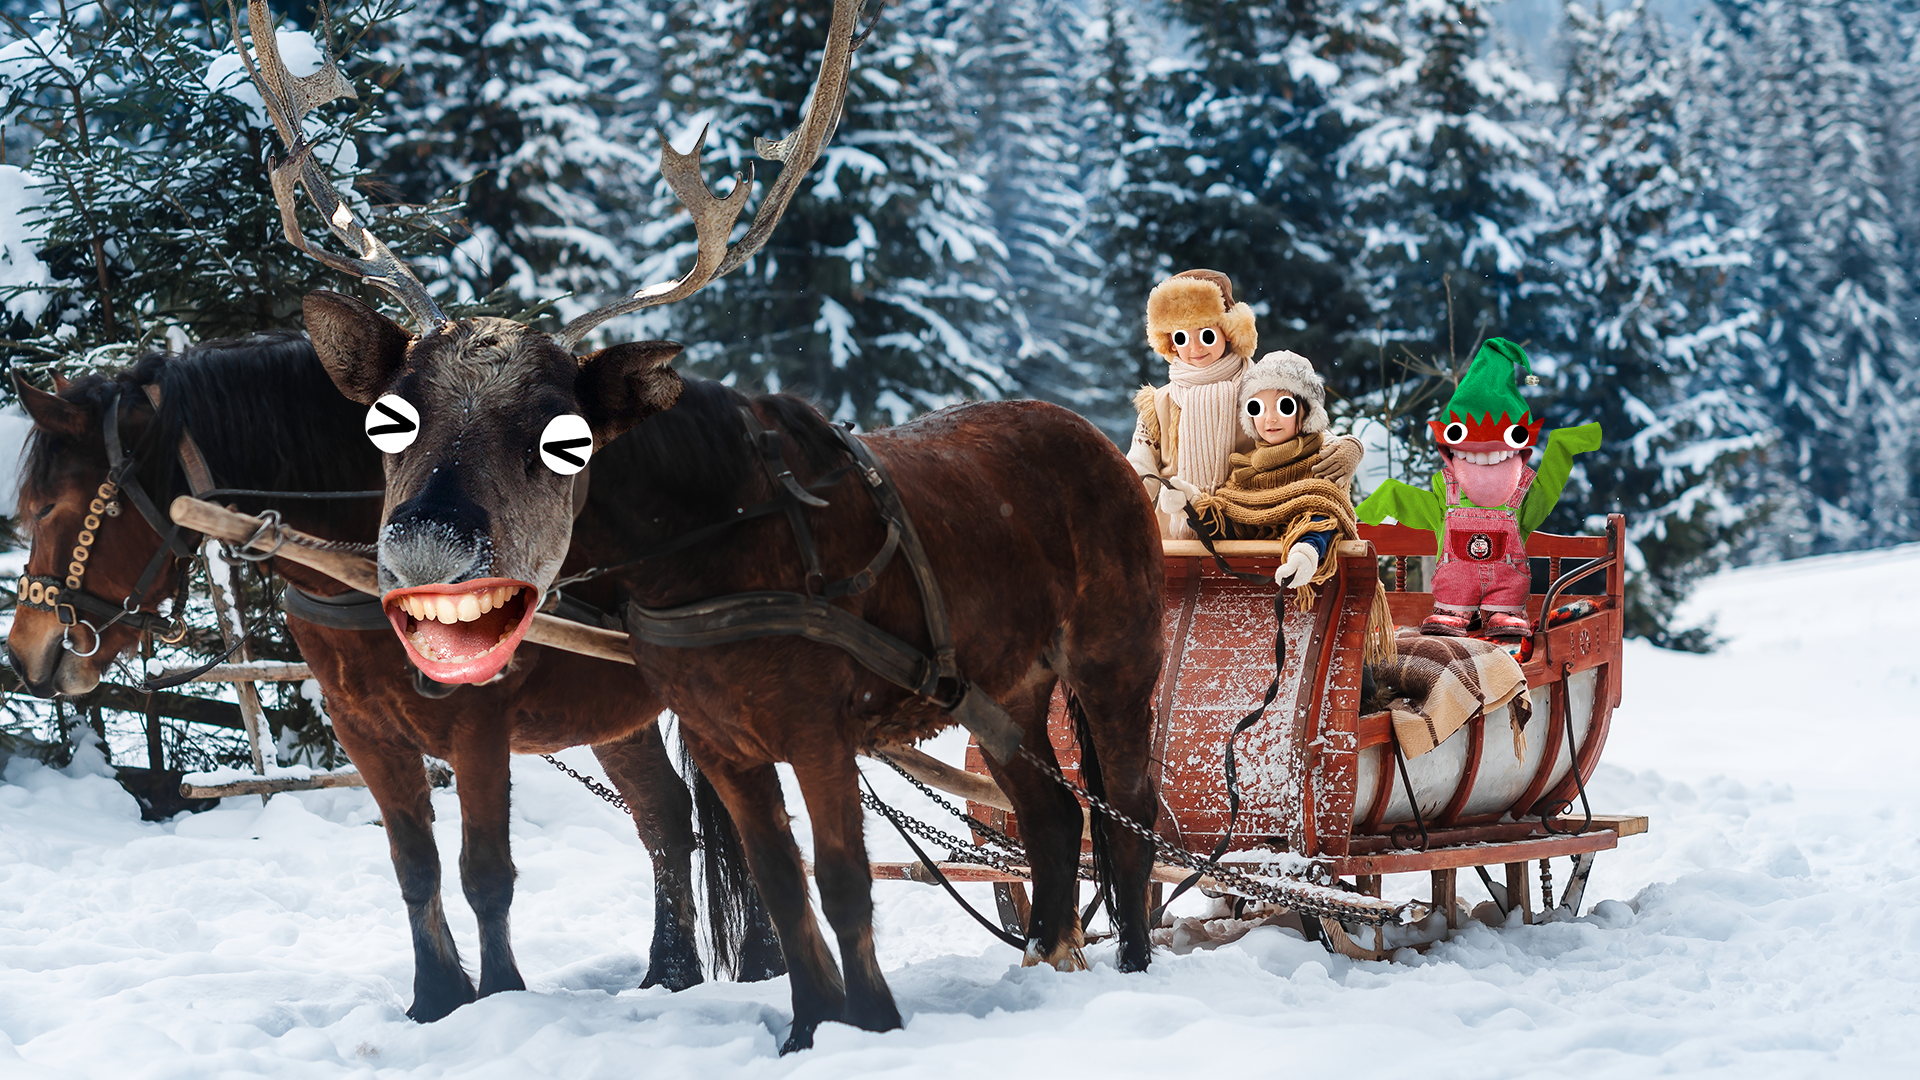 Sleigh with people and elf in the snow